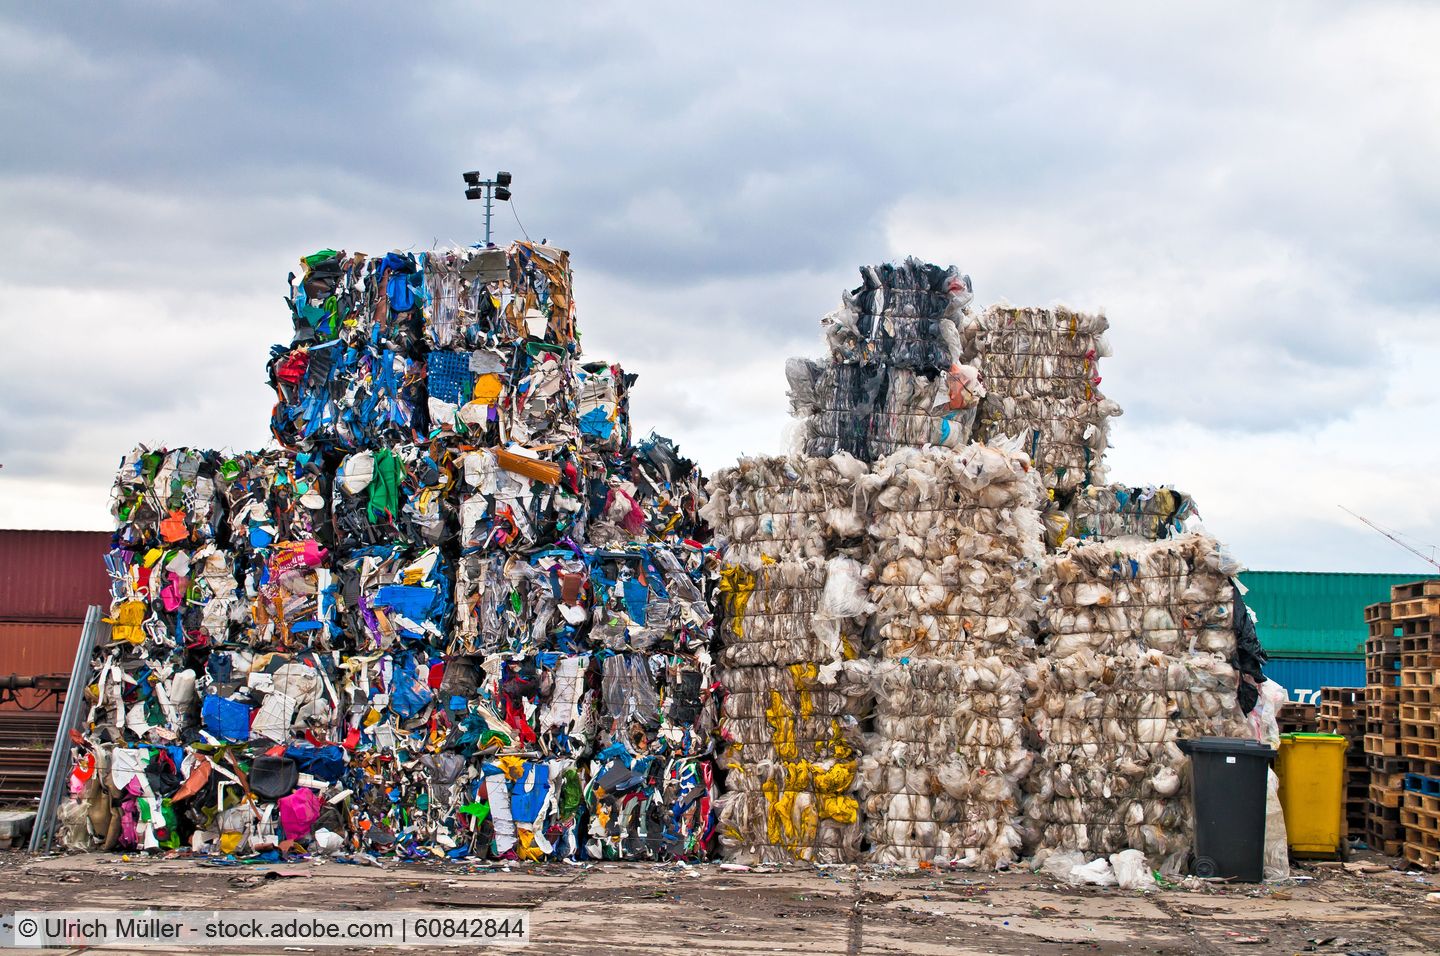 stacked bales of waste plastic in a storage yard against a cloudy sky